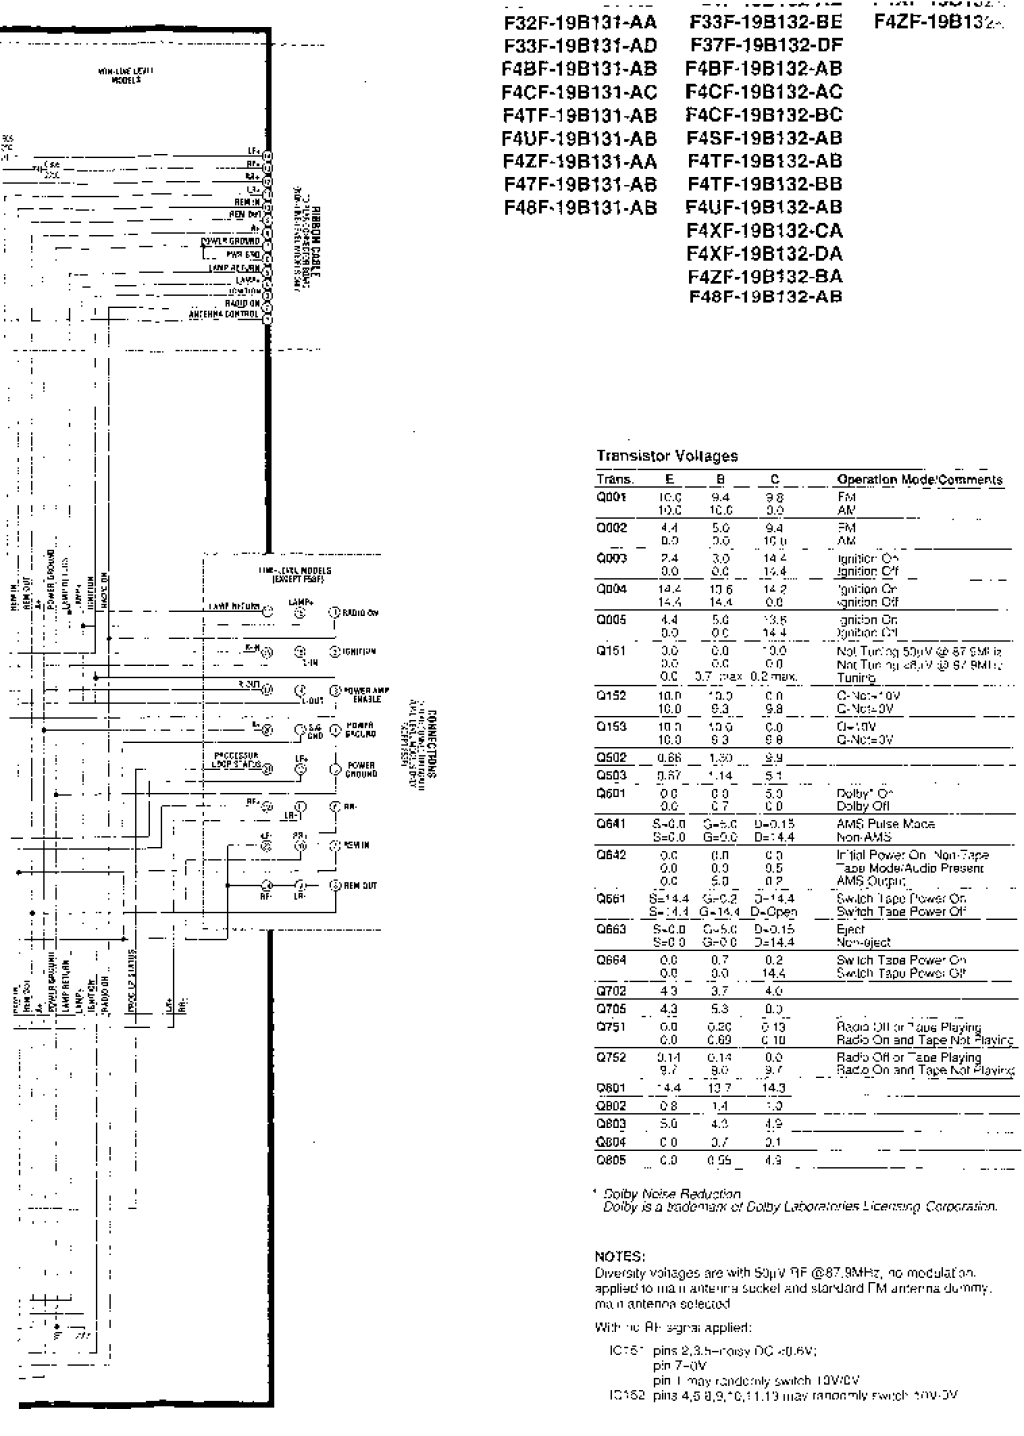 Picture of: FORD CD SCH Service Manual download, schematics, eeprom